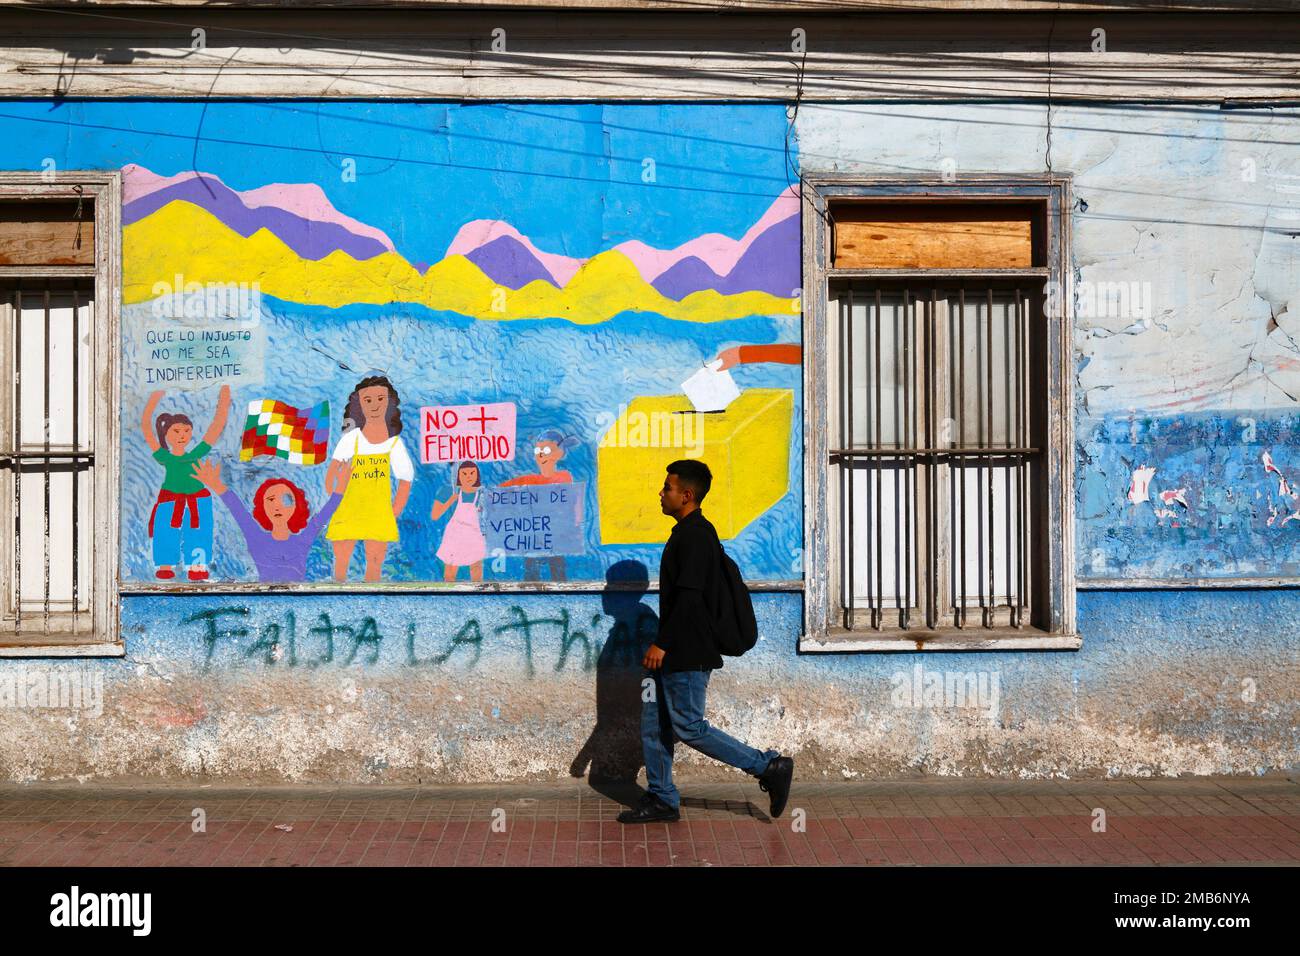 Man walking past mural on wall of school protesting against violence against women and demanding equal rights for women, Copiapo, Region III, Chile Stock Photo